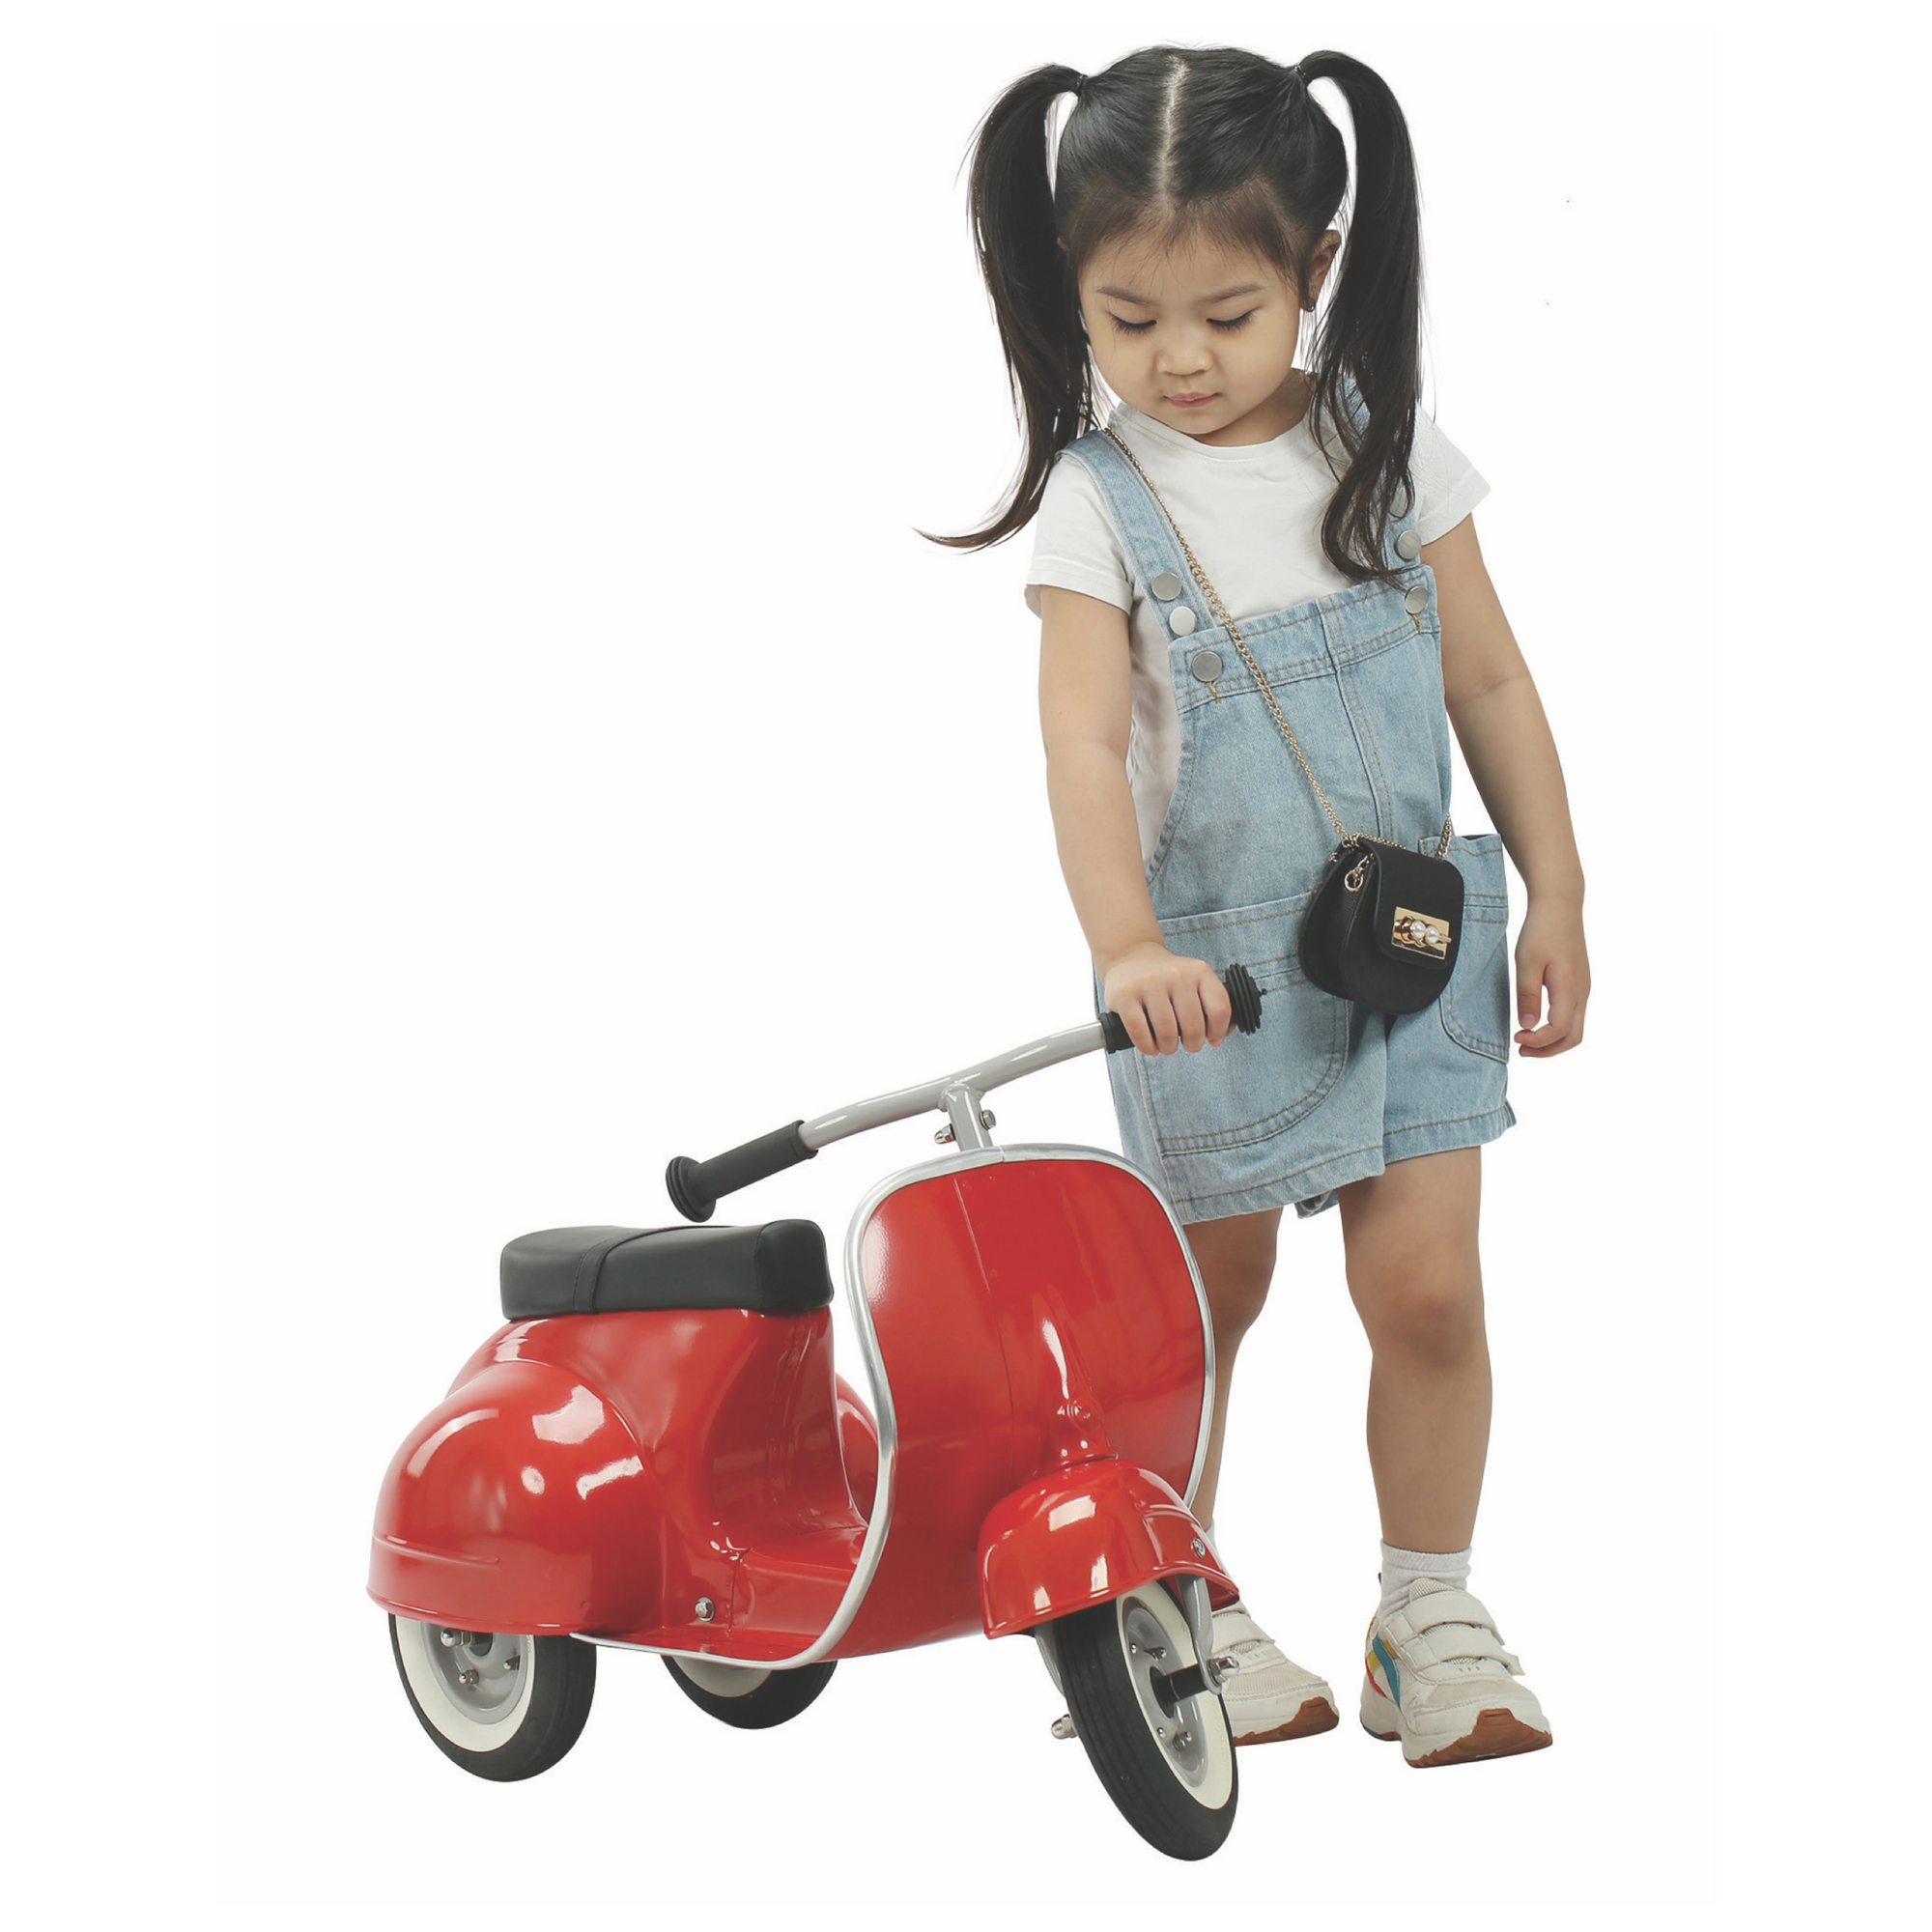 Ambosstoys PRIMO Ride on Kids Toy Scooter - Red